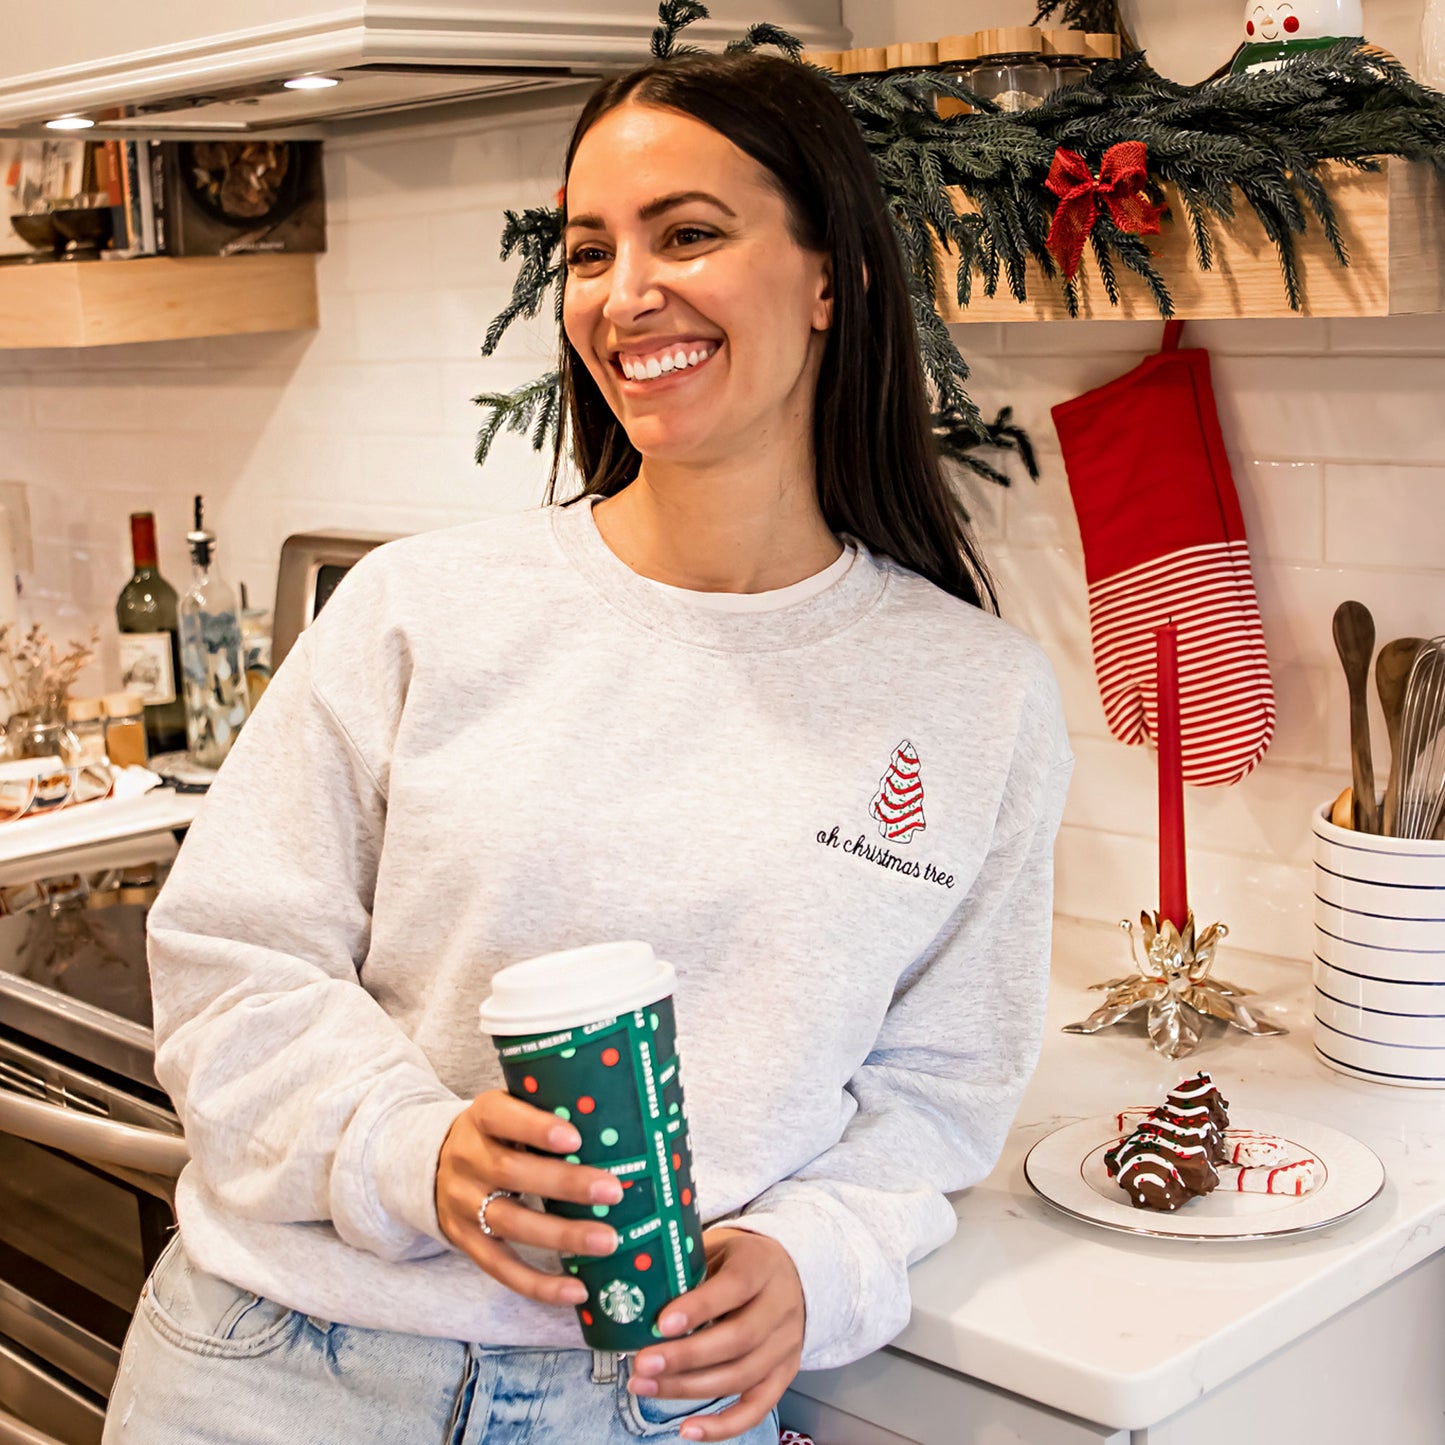 Woman styling an ash crewneck sweatshirt in a Christmas decorated kitchen. The sweatshirt features an embroidered little debbie Christmas tree and the text oh christmas tree below.